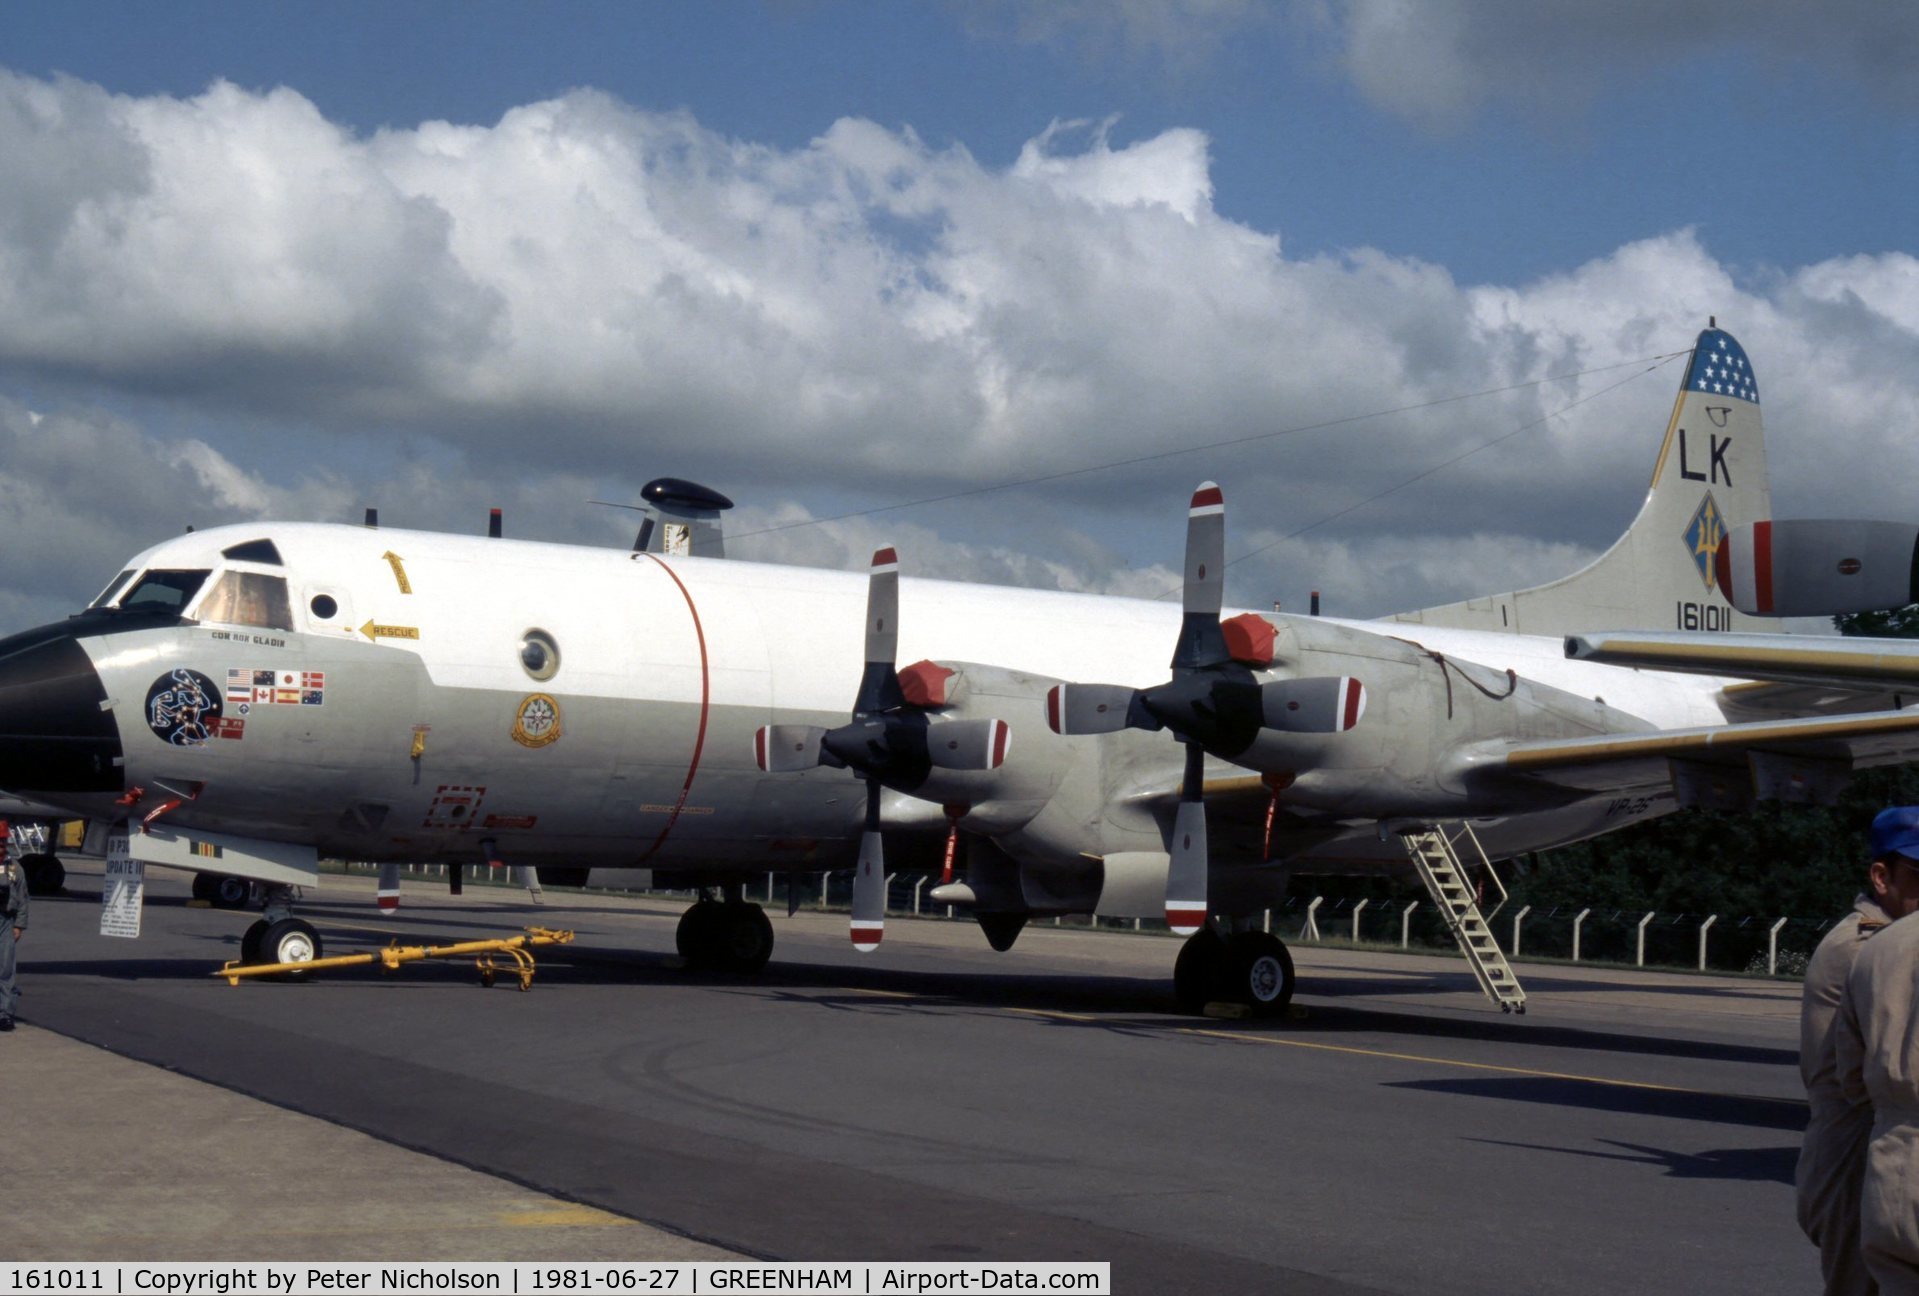 161011, 1979 Lockheed P-3C Orion C/N 285A-5693, P-3C Orion of Patrol Squadron VP-26 on display at the 1981 Intnl Air Tattoo at RAF Greenham Common.